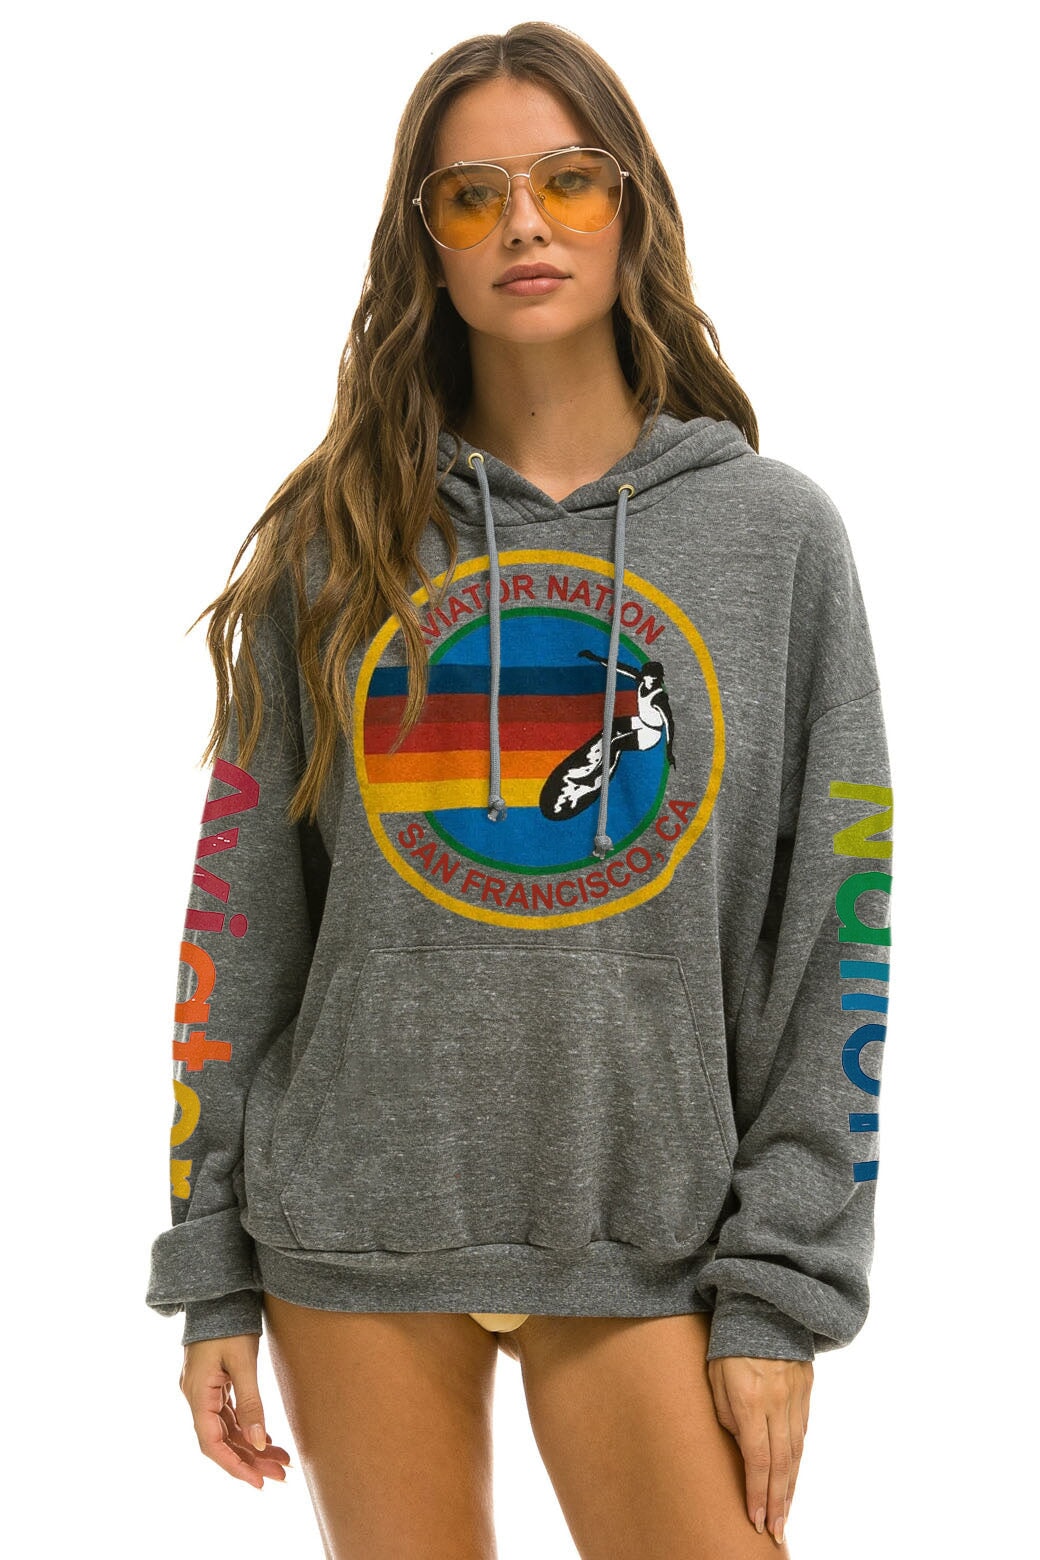 AVIATOR NATION SAN FRANCISCO RELAXED PULLOVER HOODIE - HEATHER GREY Hoodie Aviator Nation 